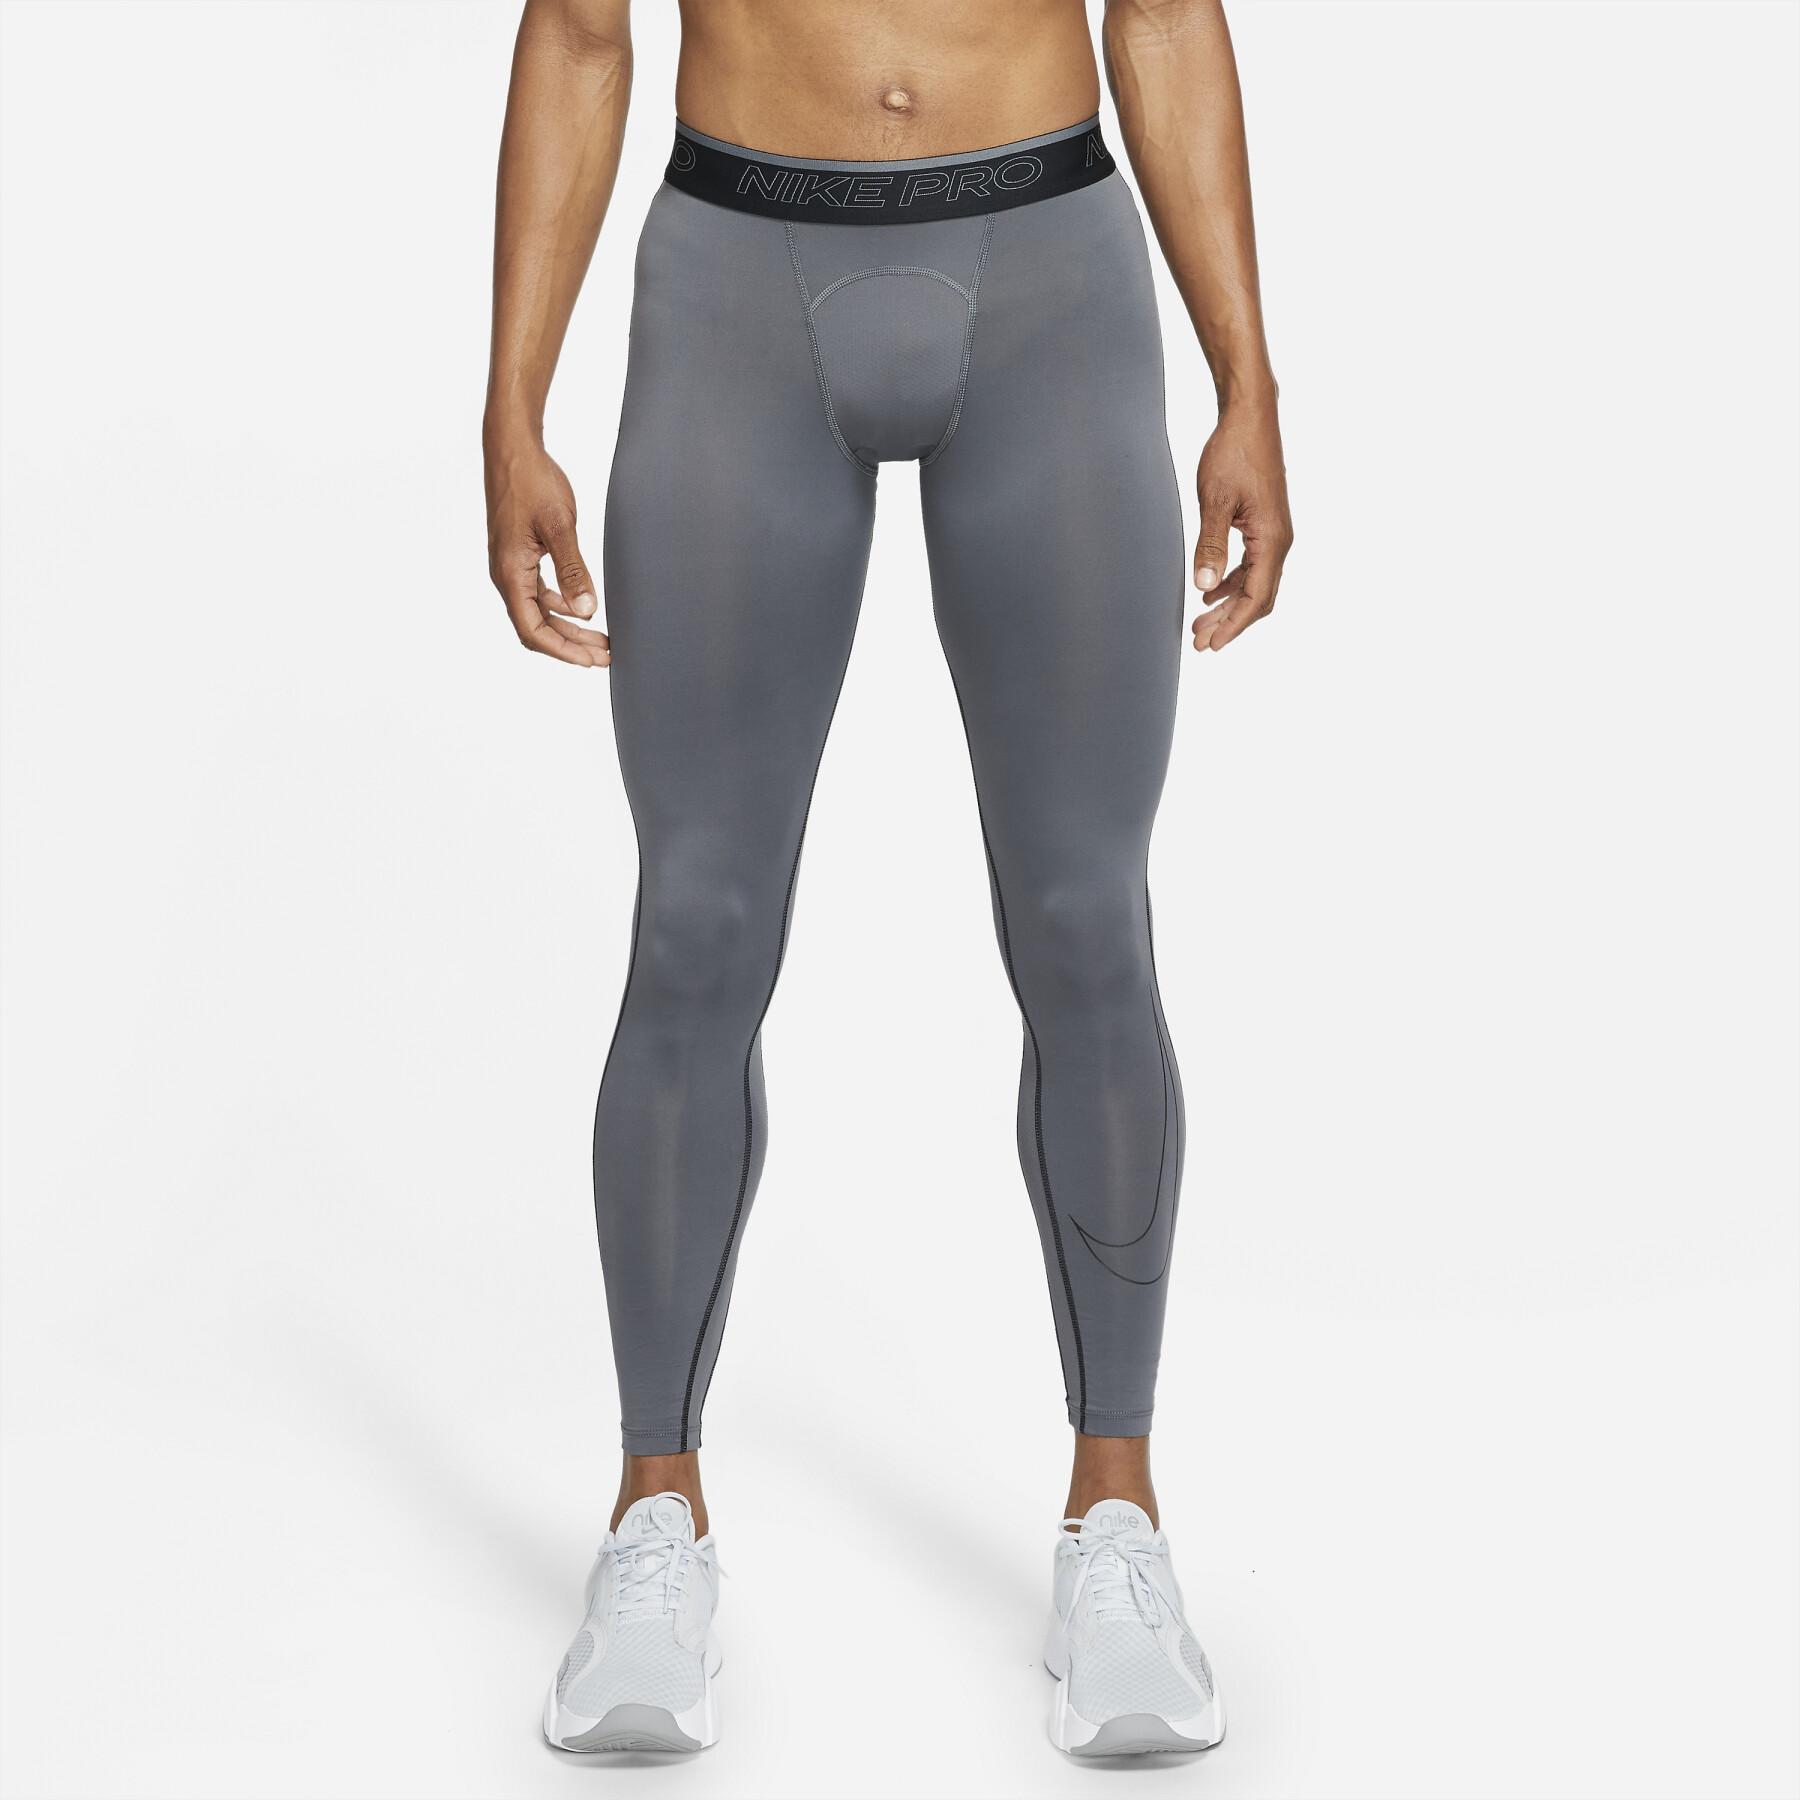 Legging compression Nike Dri-Fit - volleyball Pants - Textile - Volleyball  wear